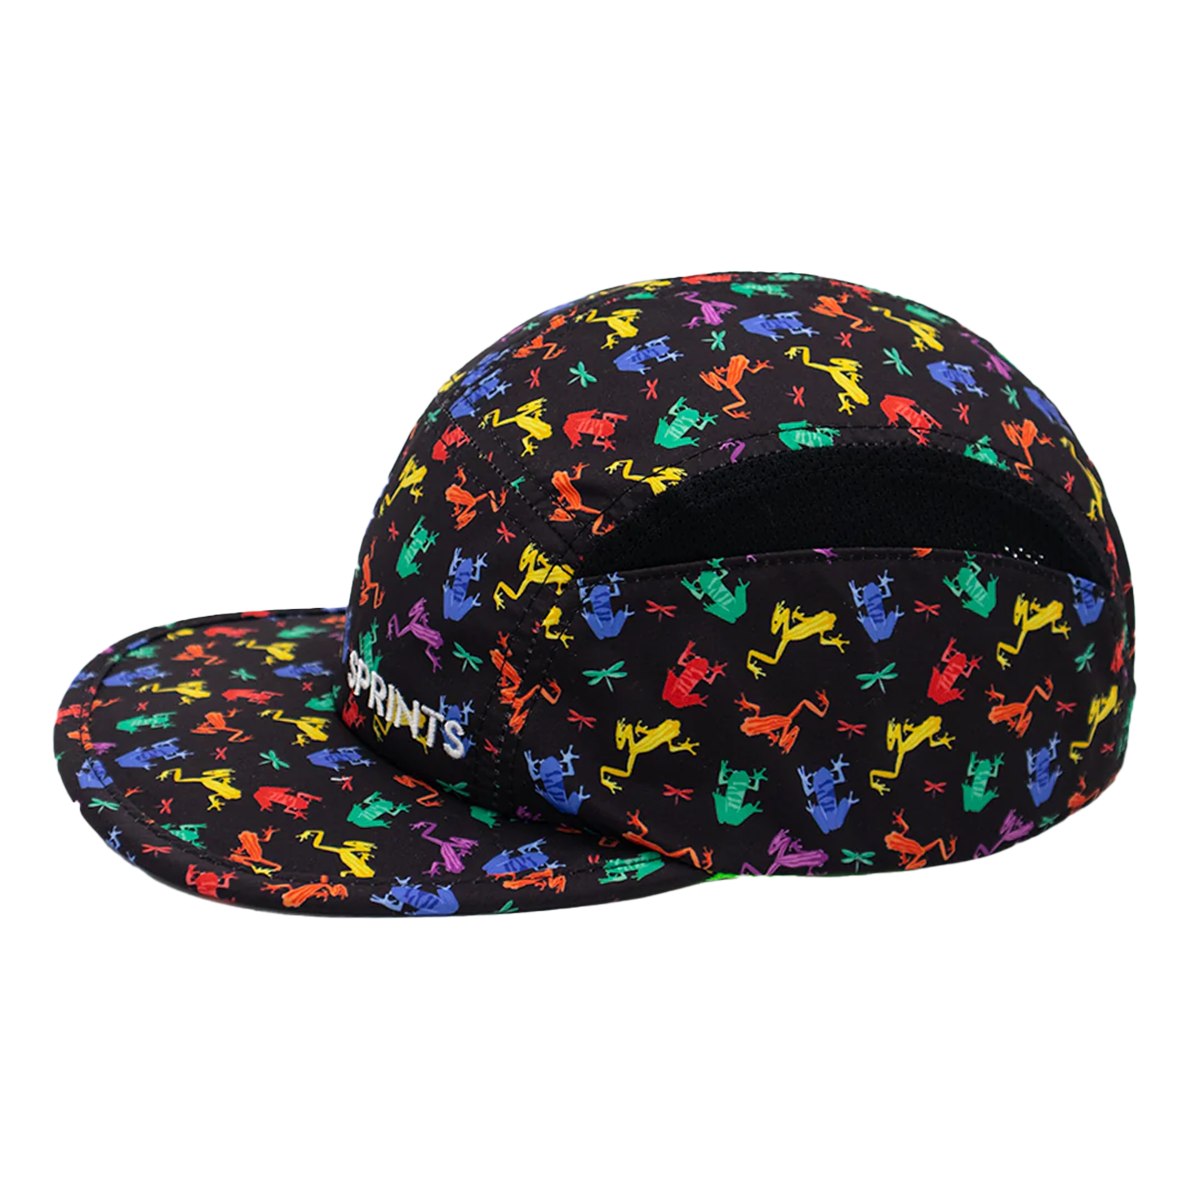 Sprints 5 Panel Hat, , large image number null